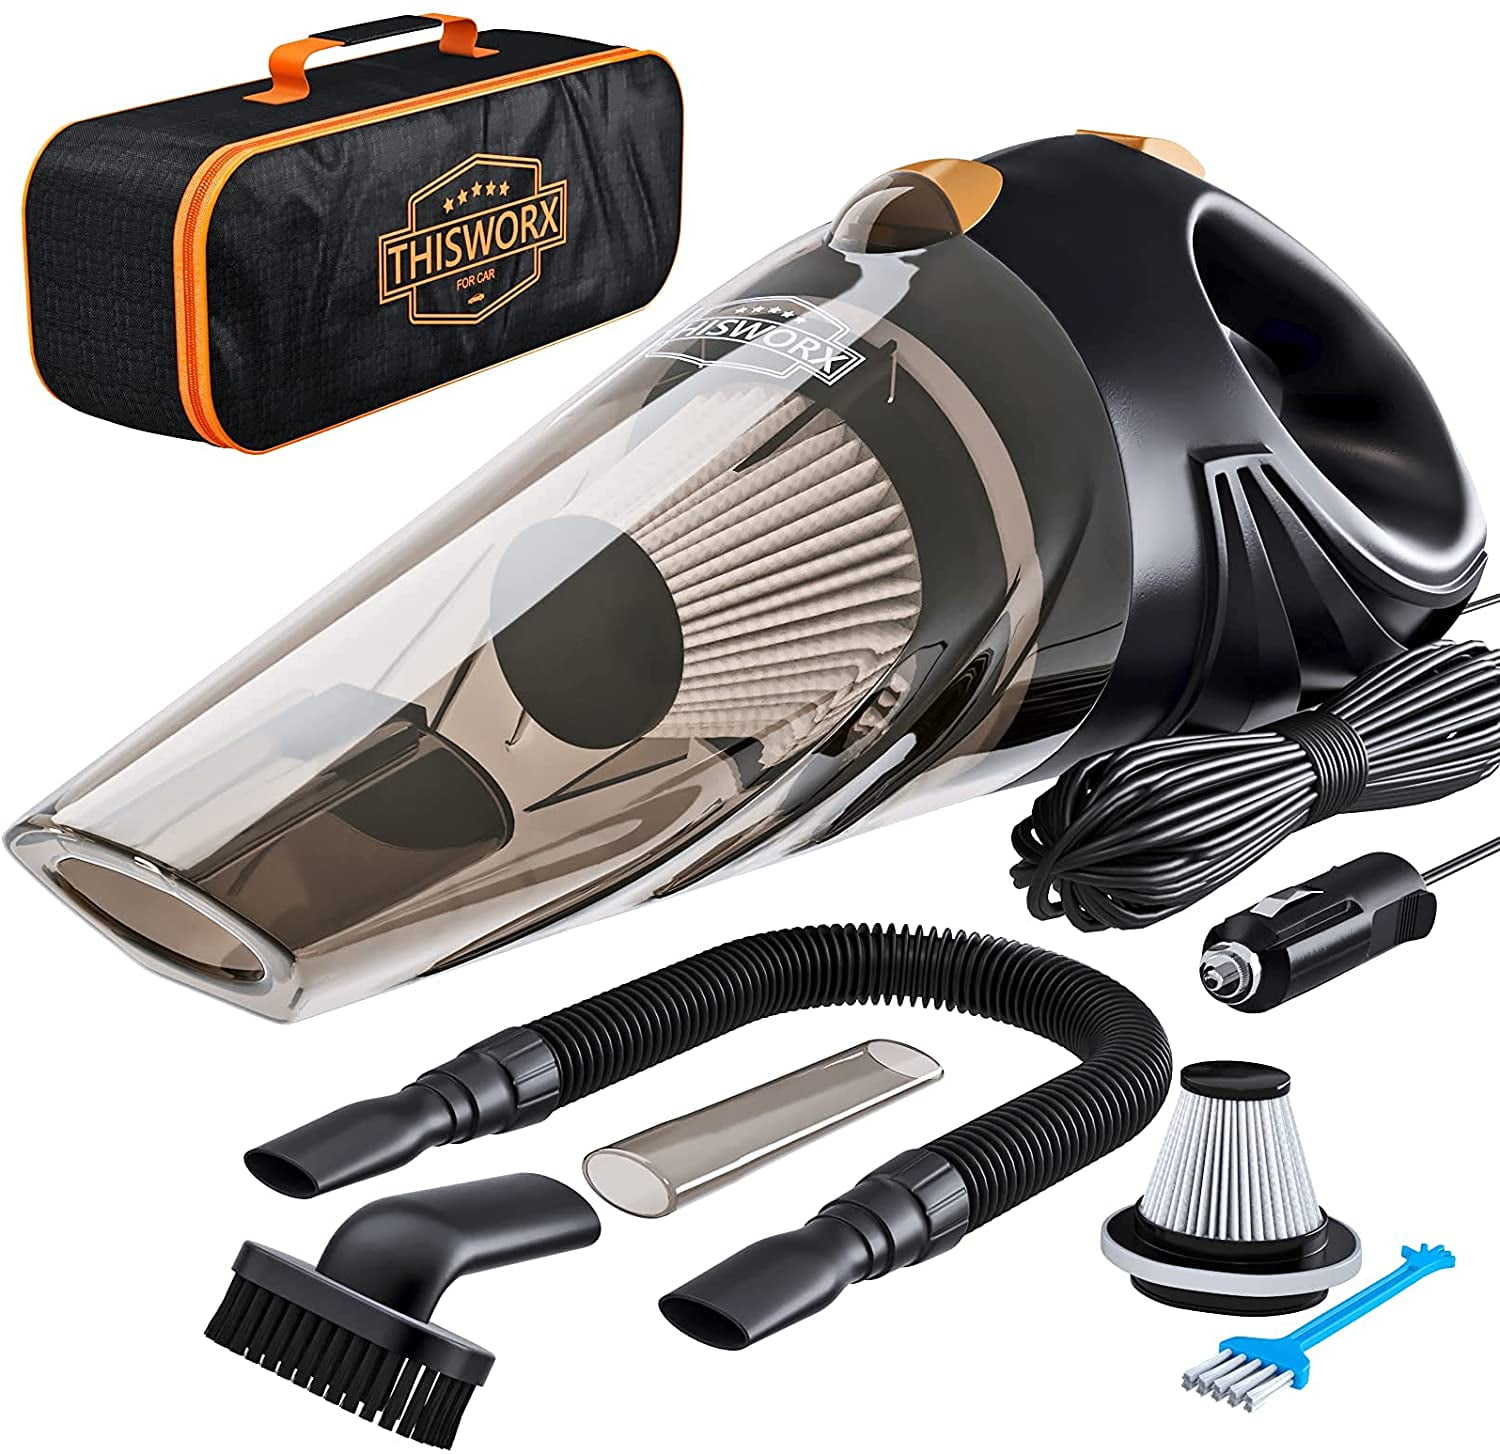  ThisWorx Cordless Car Vacuum - Portable, Mini Handheld Vacuum  w/Rechargeable Battery and 3 Attachments - High-Powered Vacuum Cleaner w/  60w Motor : Automotive